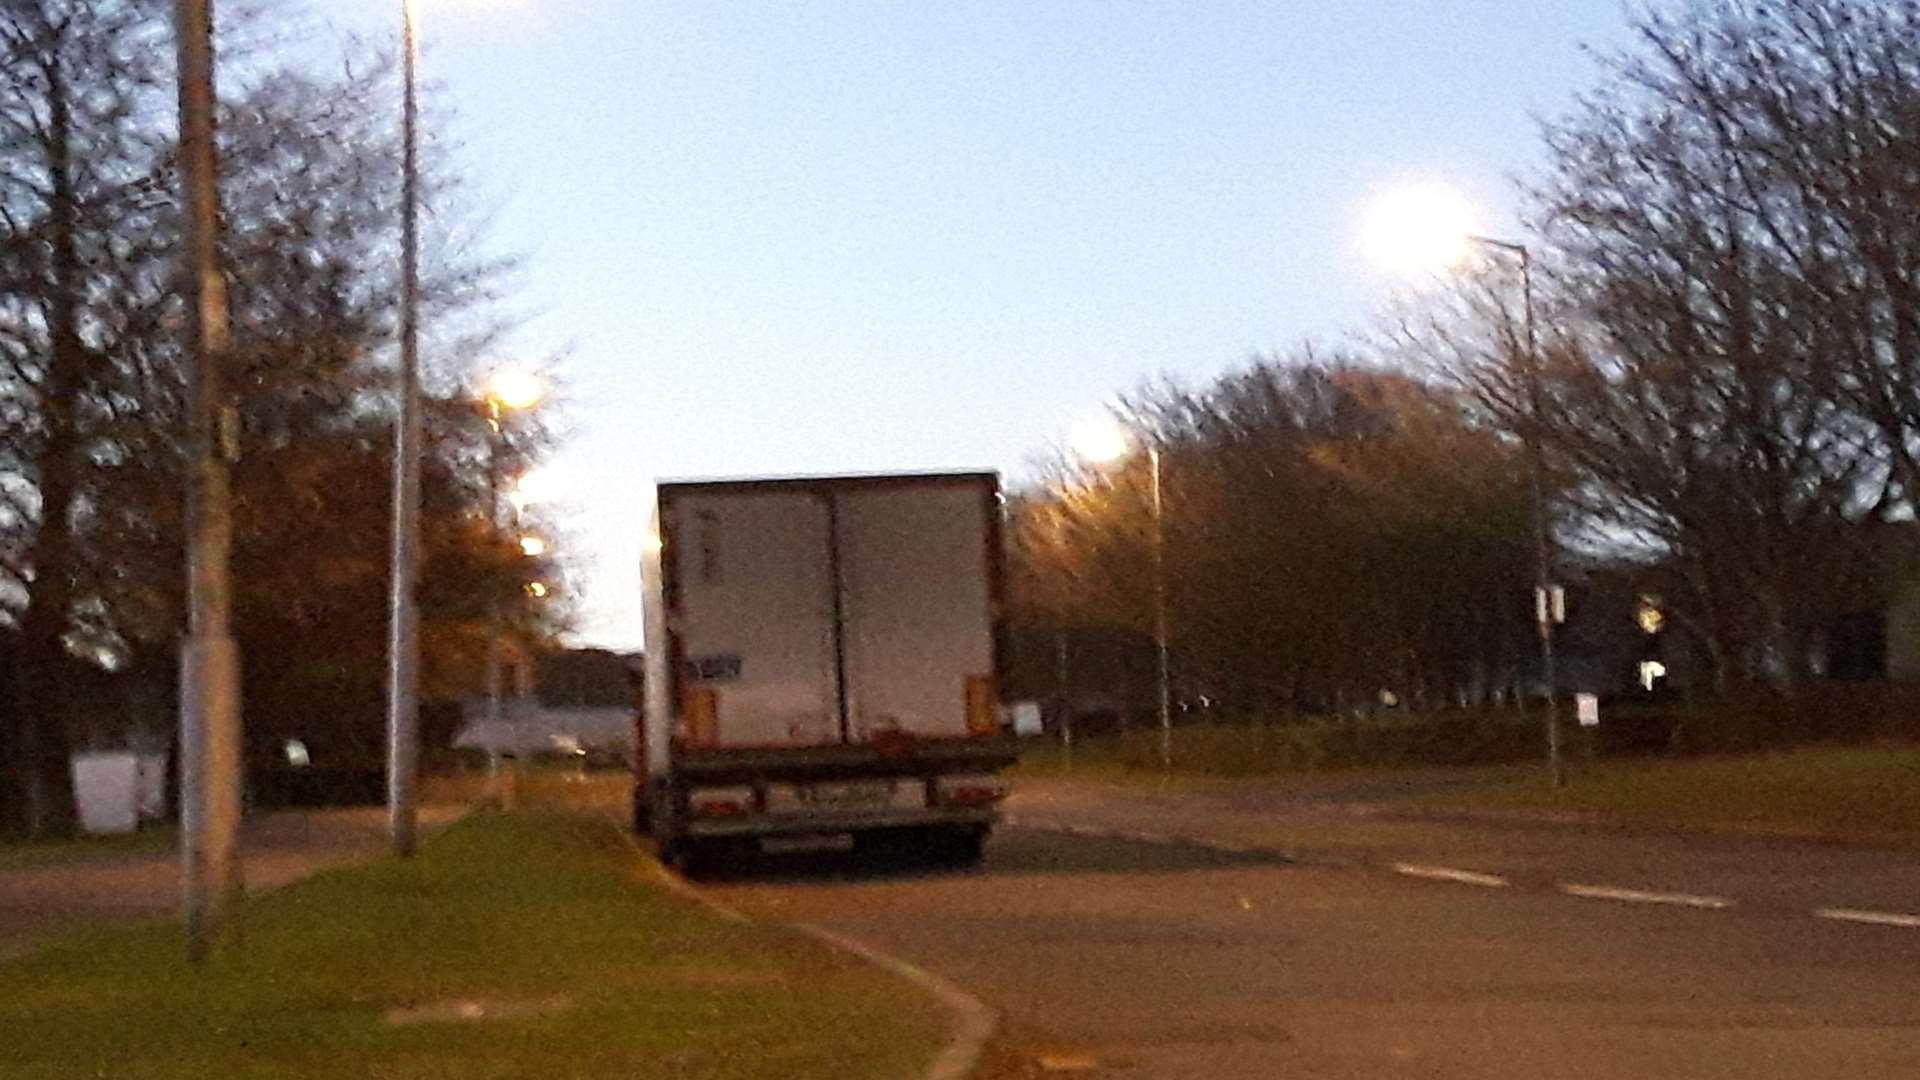 Hundreds of lorry drivers have been fined for parking illegally in Medway